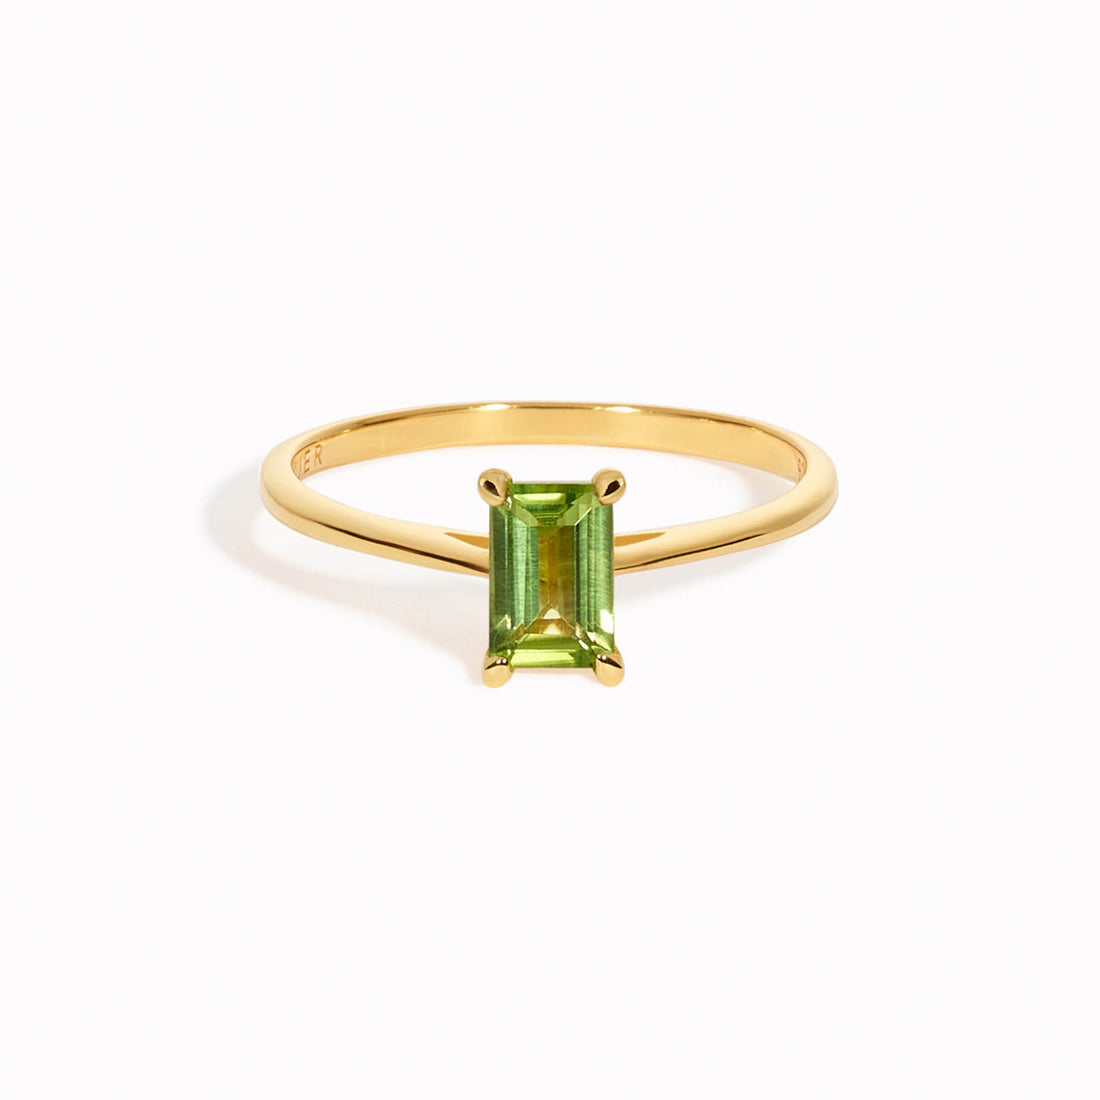 A gold ring with a baguette cut gemstone